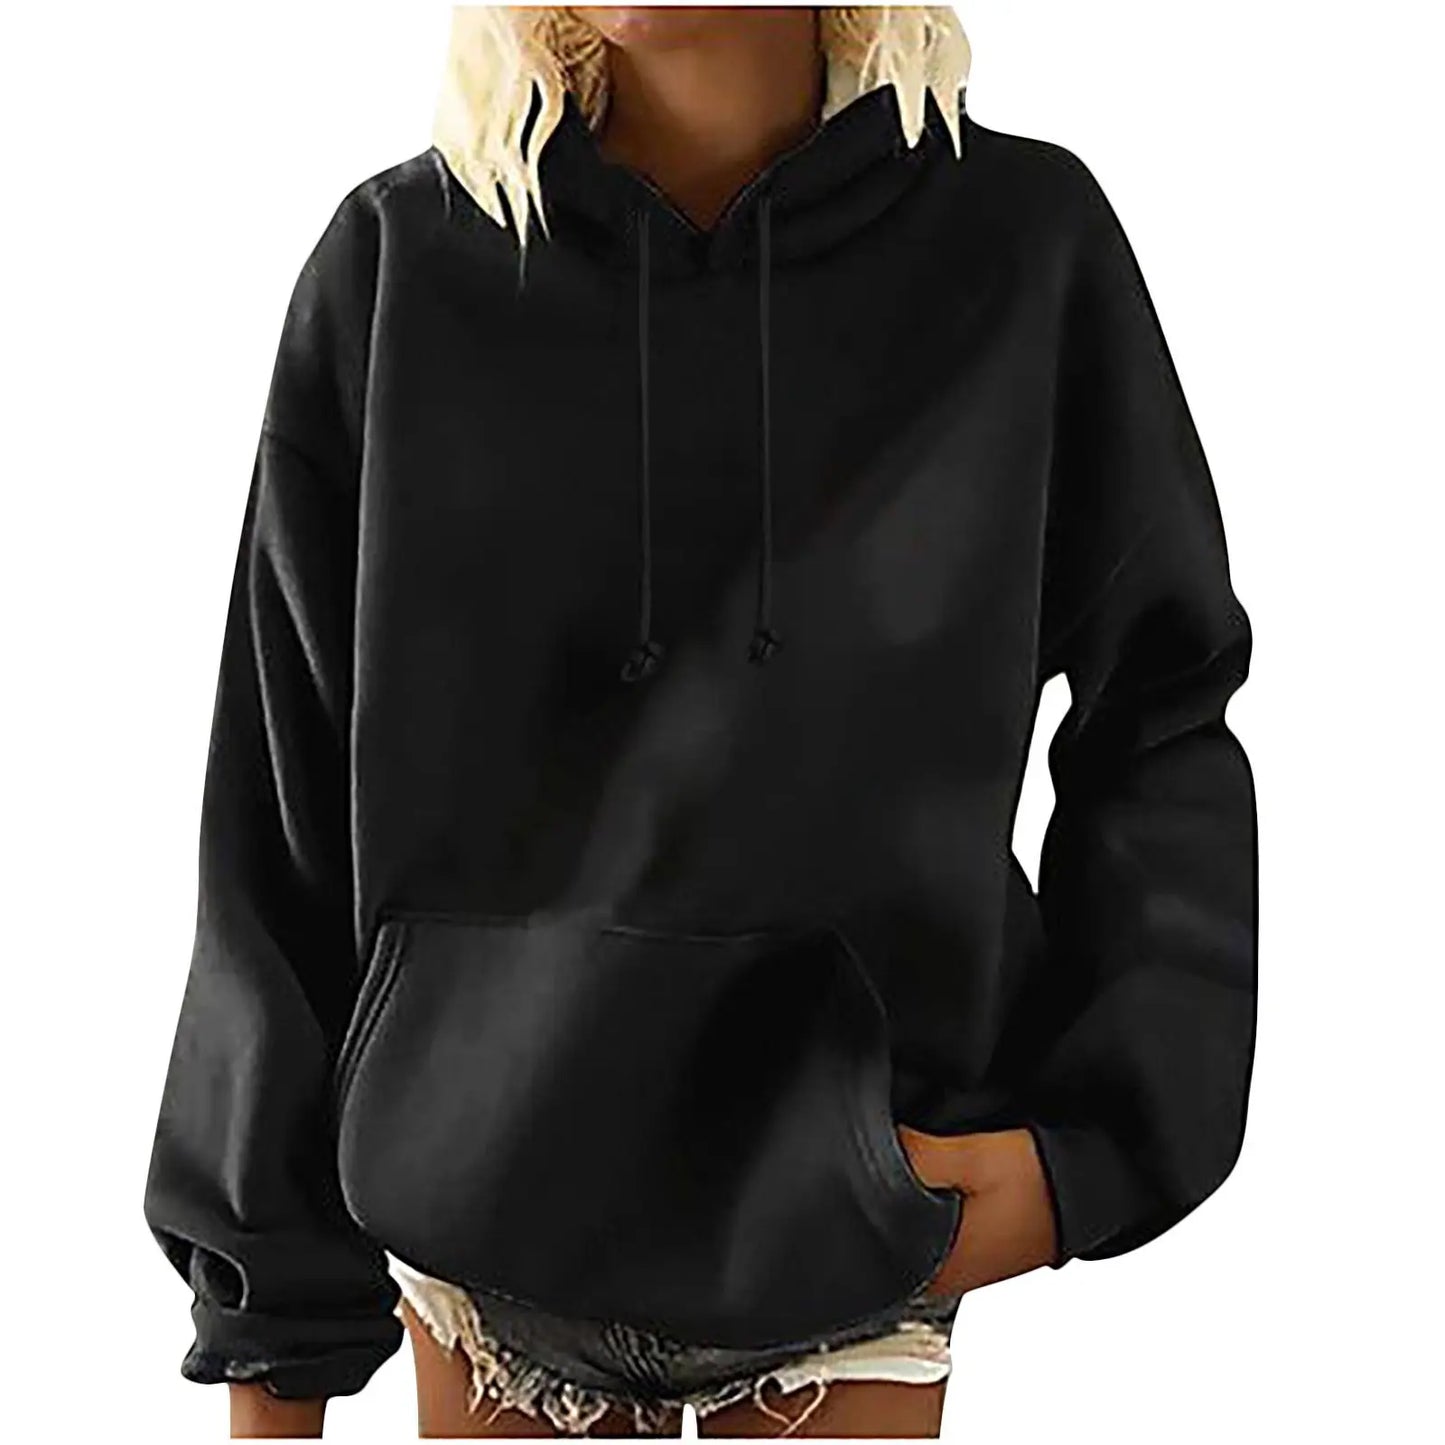 Women's New Cute Harajuku Style Trend Y2K Back Figure Print Hooded Sports Long-Sleeved Pullover Sweater Hoodies